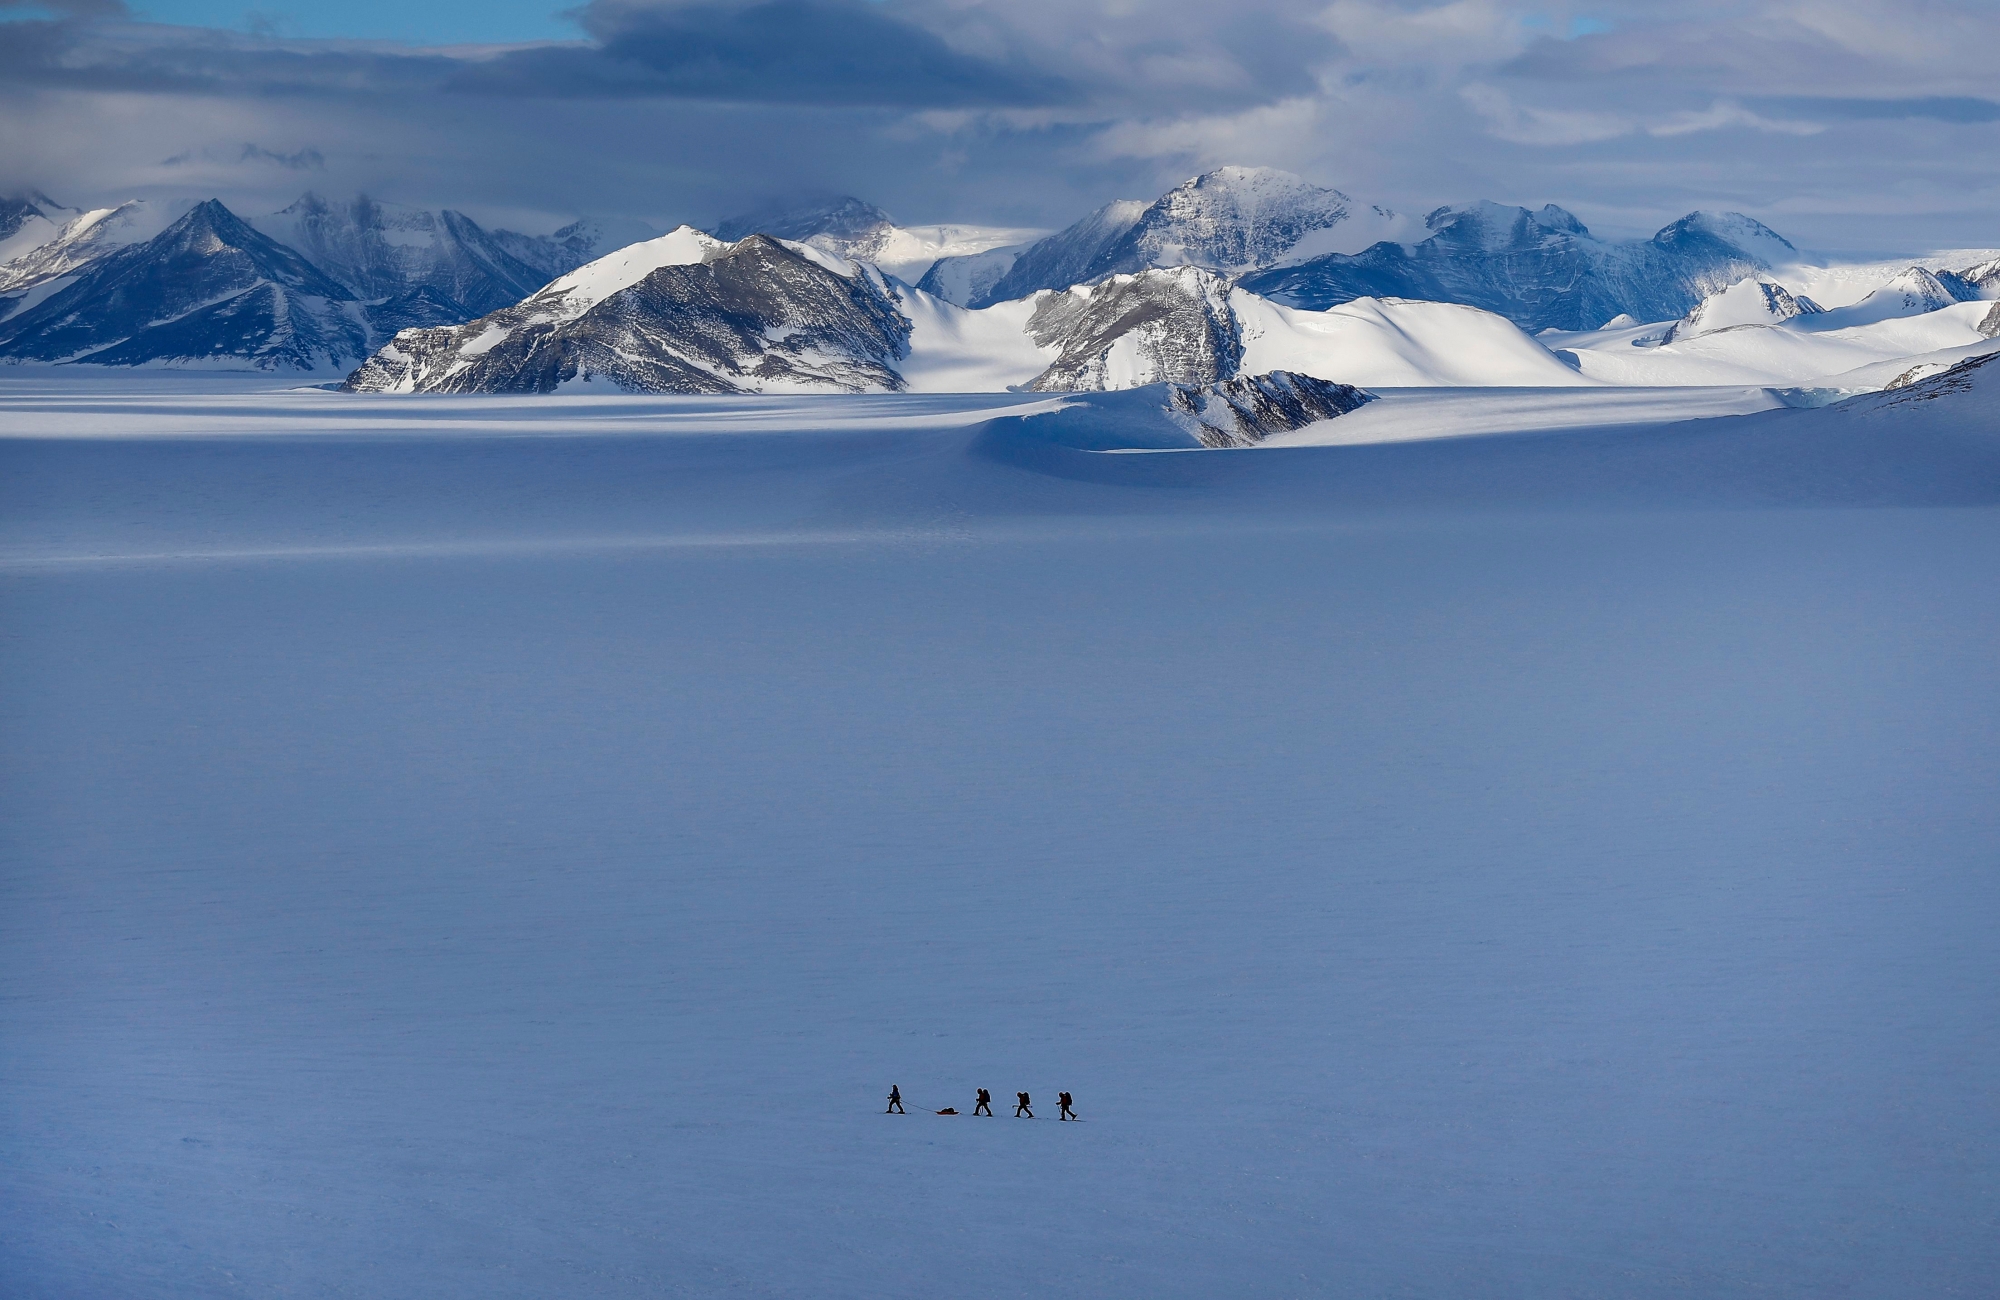 epaselect epa07239648 (19/29) Chilean scientist Ricardo Jana (L) and a group of military explorers track an area with GPS near the Higgins Nunatak, on the Union Glacier in the Ellsworth Mountains, Antarctica, 29 November 2018. A group of eight researchers take part in the first activity of the LV Scientific Antarctic Expedition organized by the Chilean Antarctic Institute (INACH). The Glacier Union camp is a Chilean polar station operated by the three groups of the Armed Forces of Chile and the INACH, and marks the beginning of all scientific activities planned in the Antarctic territory for the summer season. Glacier Union is the third most southern camp of the continent and it is only open for a month.  EPA/FELIPE TRUEBA  ATTENTION: For the full PHOTO ESSAY text please see Advisory Notice epa07239629 epaselect ANTARCTICA PHOTO ESSAY SCIENTIFIC EXPLORATION